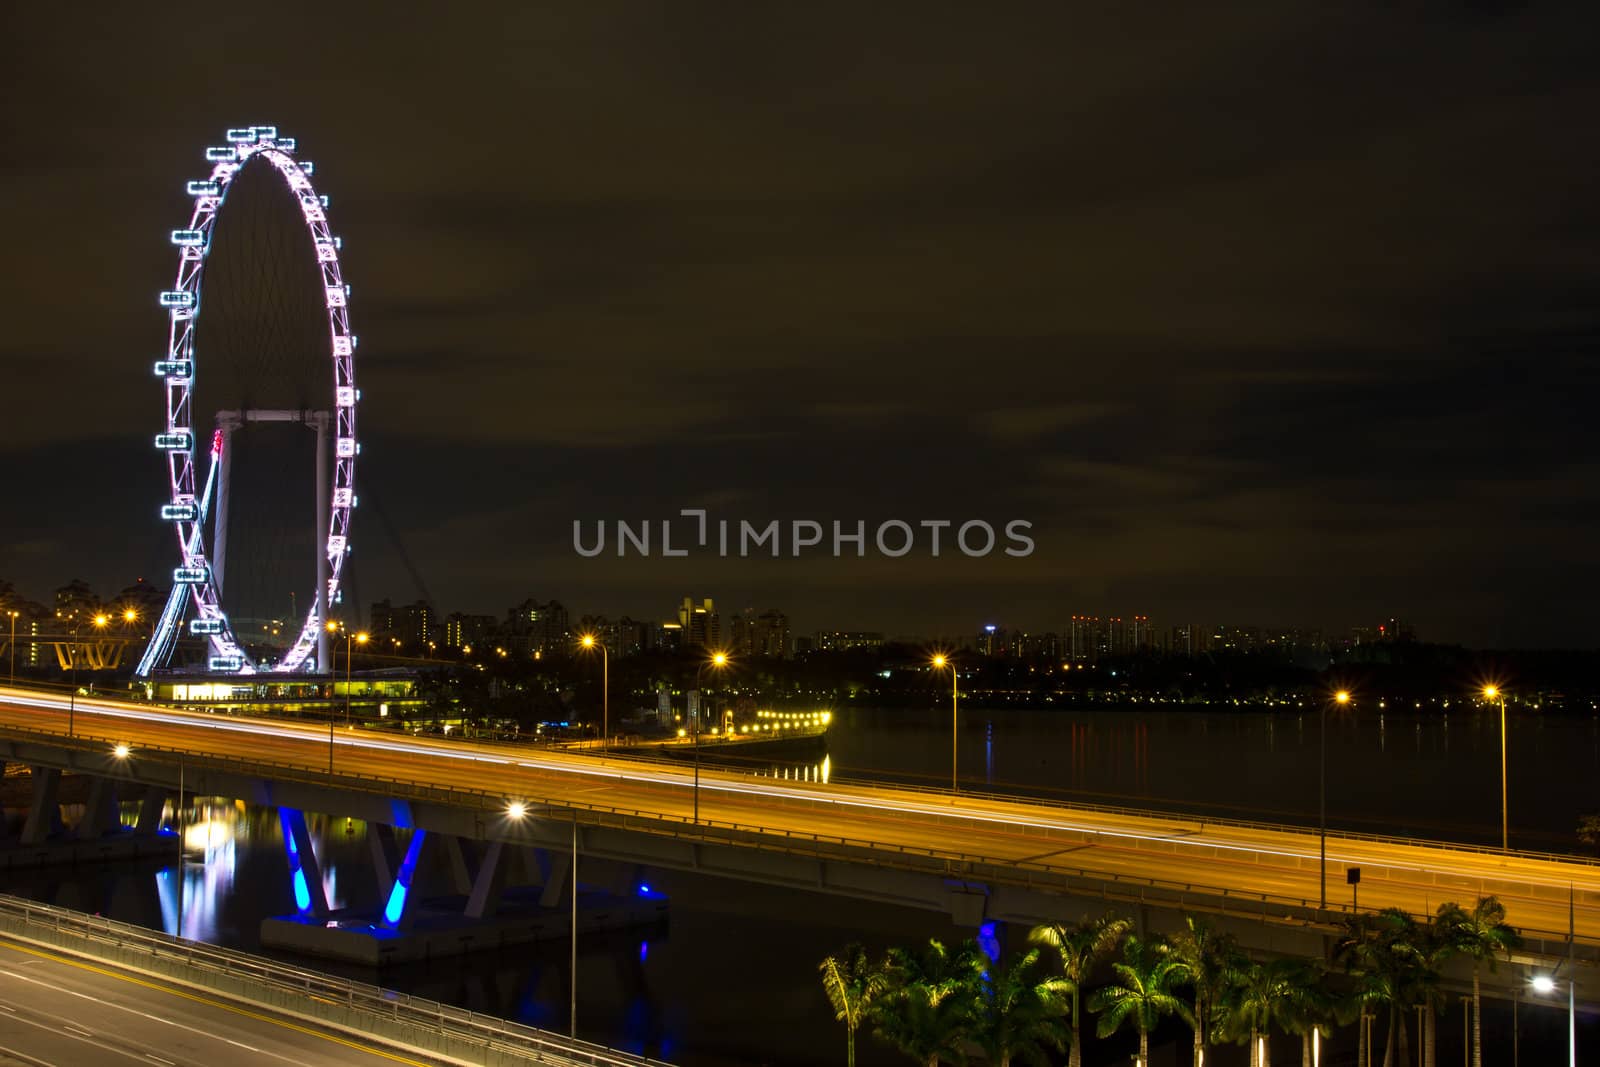 singapore flyer that near the express way